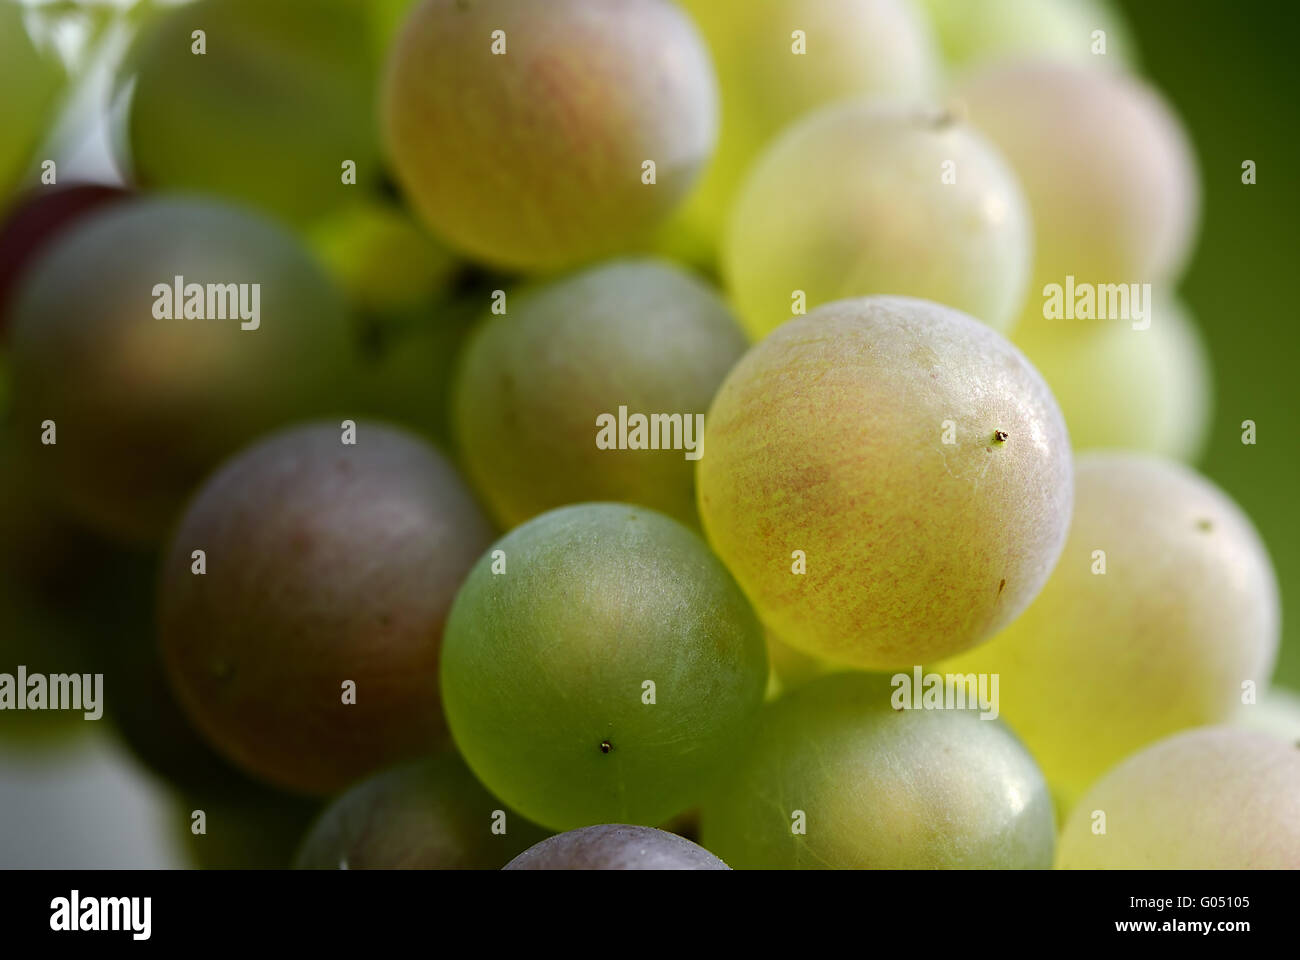 Yellow, green and red grapes, close-up Stock Photo